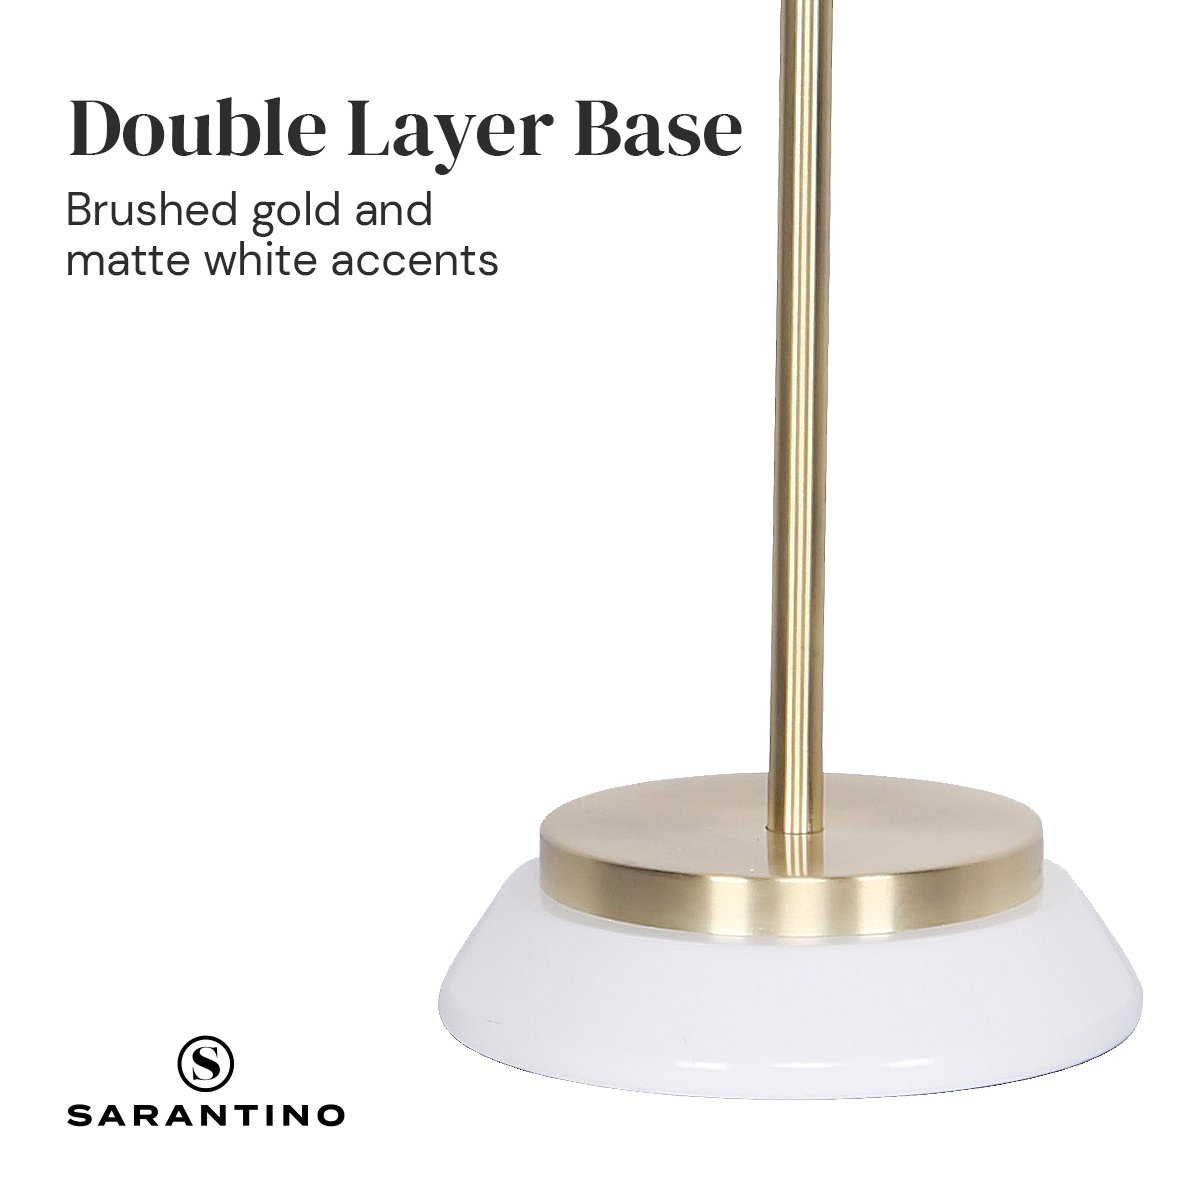 White/Brass Table Lamp